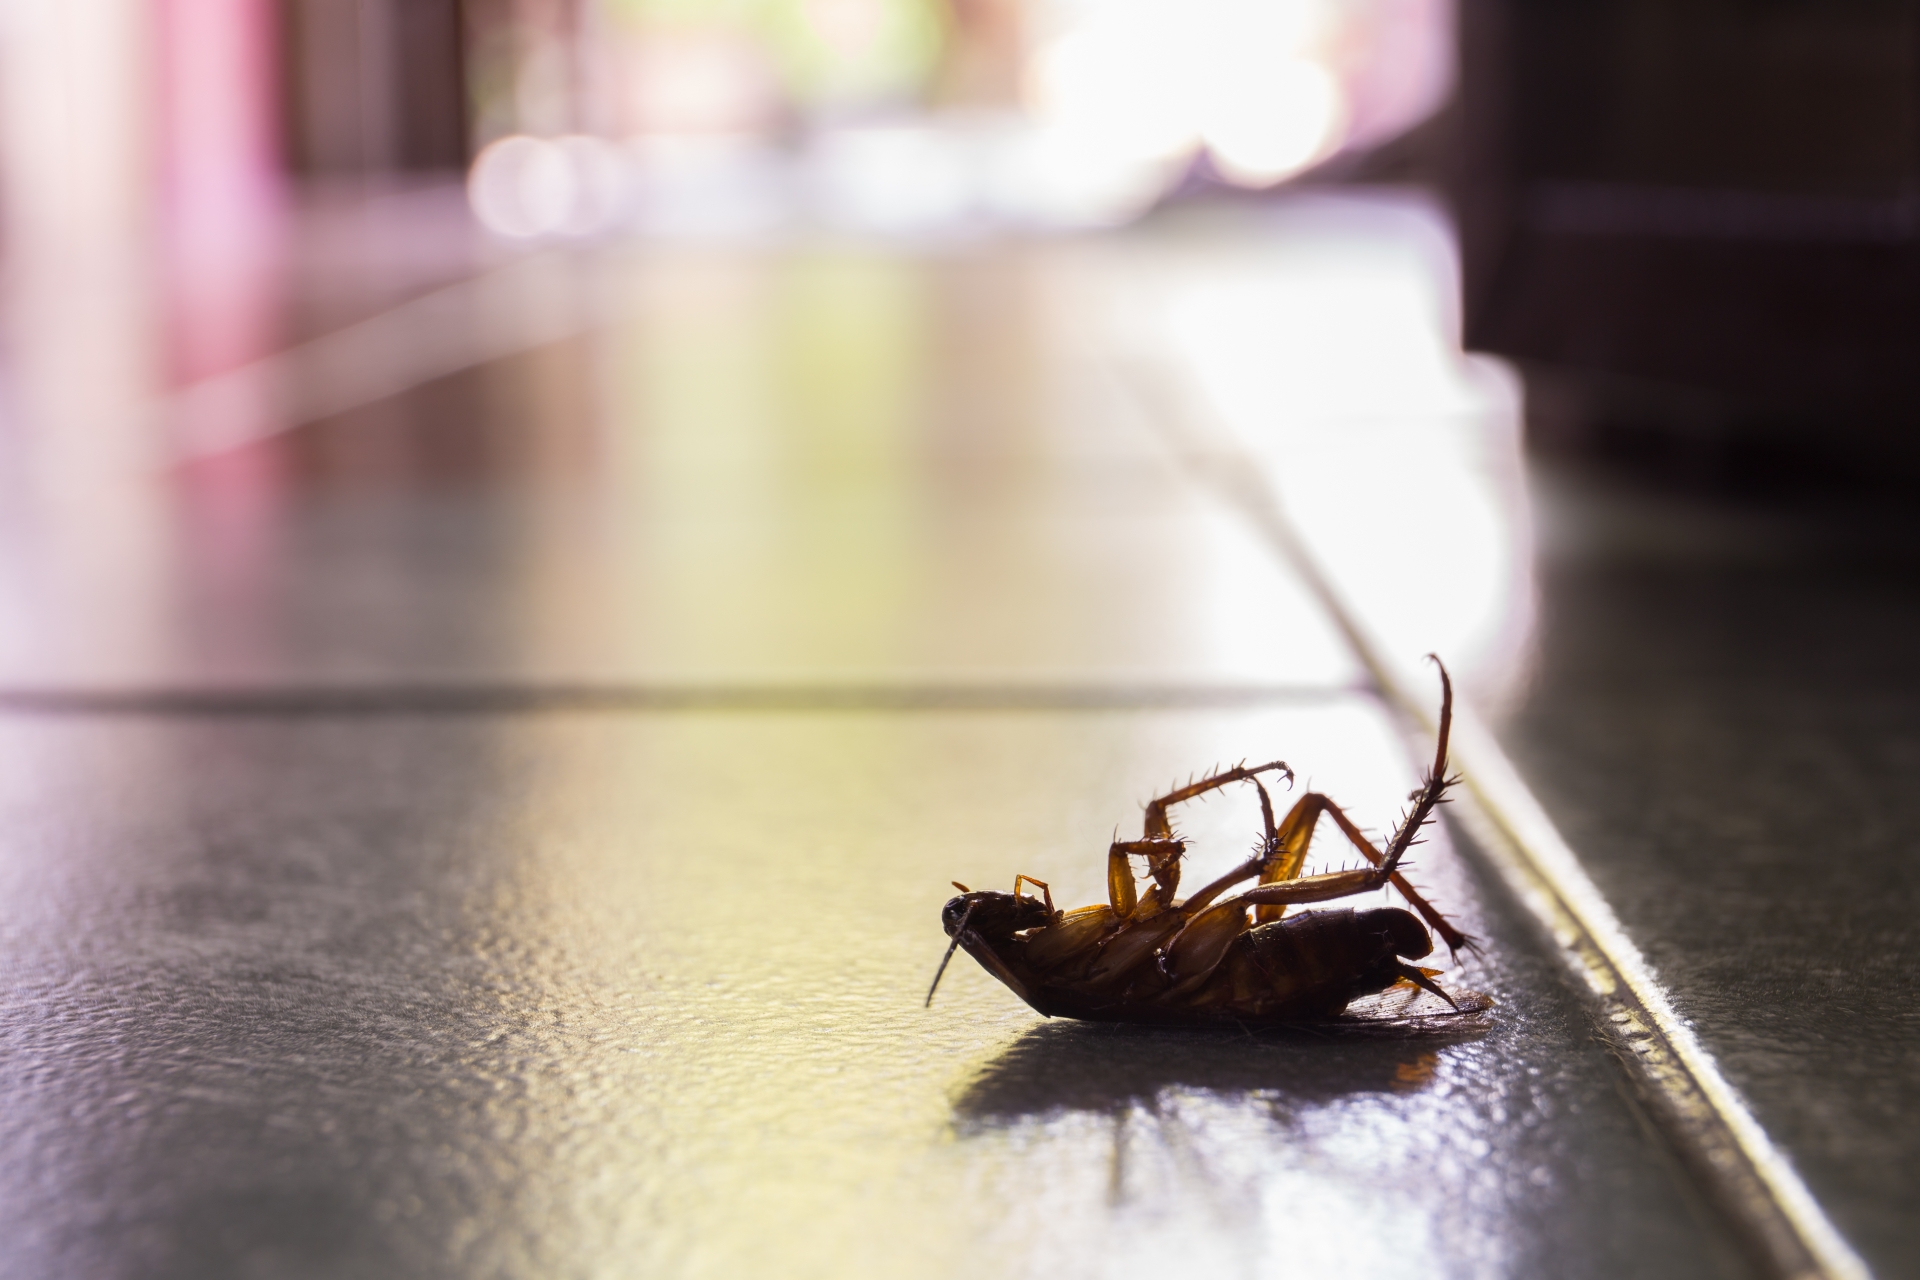 Cockroach Control, Pest Control in New Cross, New Cross Gate, SE14. Call Now 020 8166 9746